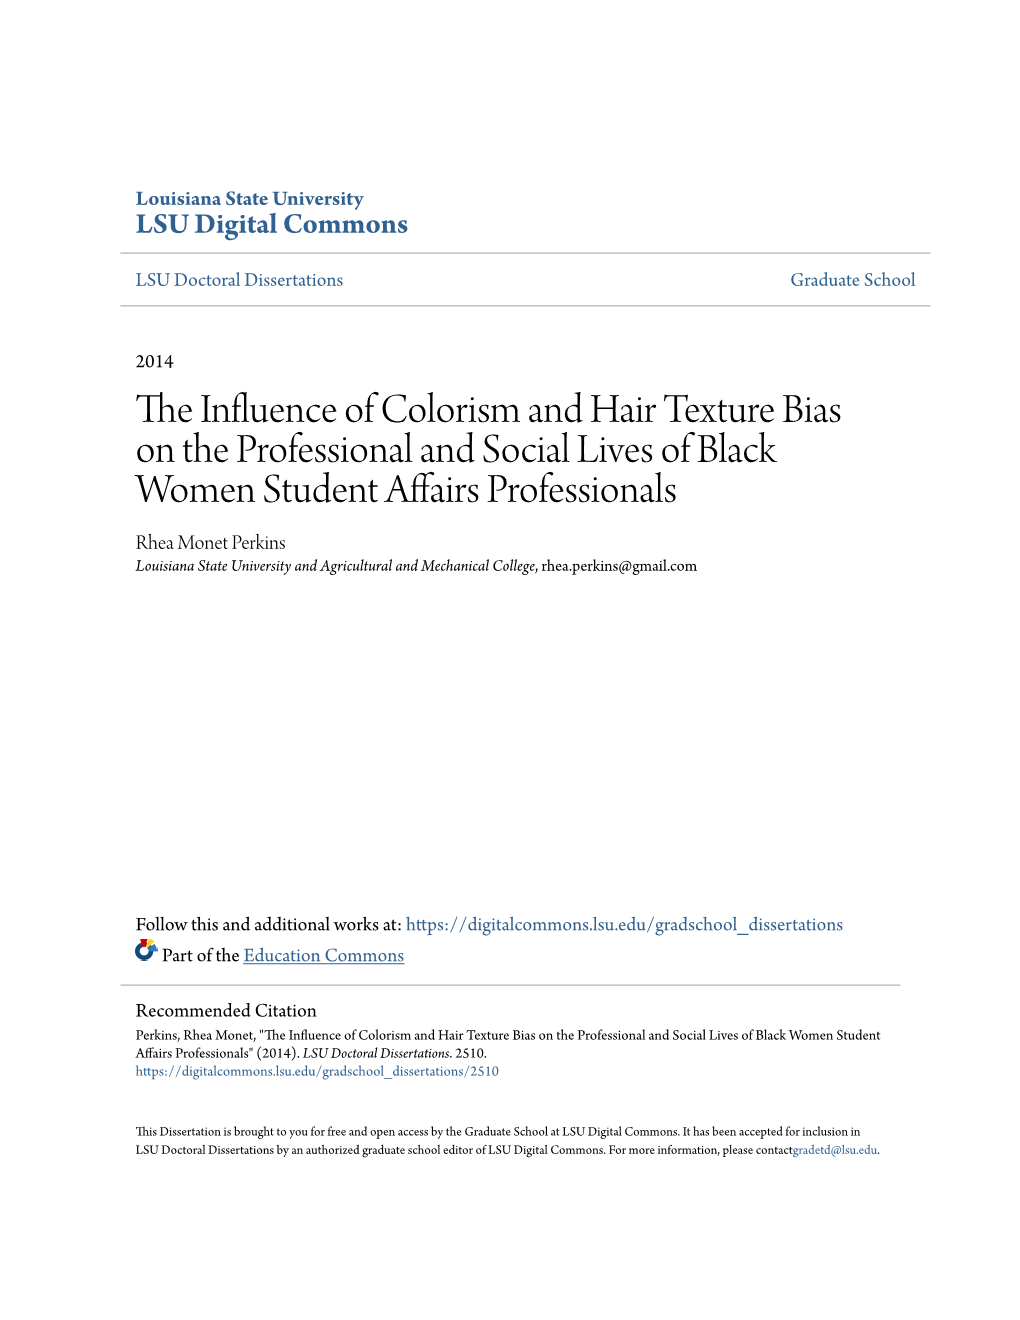 The Influence of Colorism and Hair Texture Bias on the Professional and Social Lives of Black Women Student Affairs Professionals